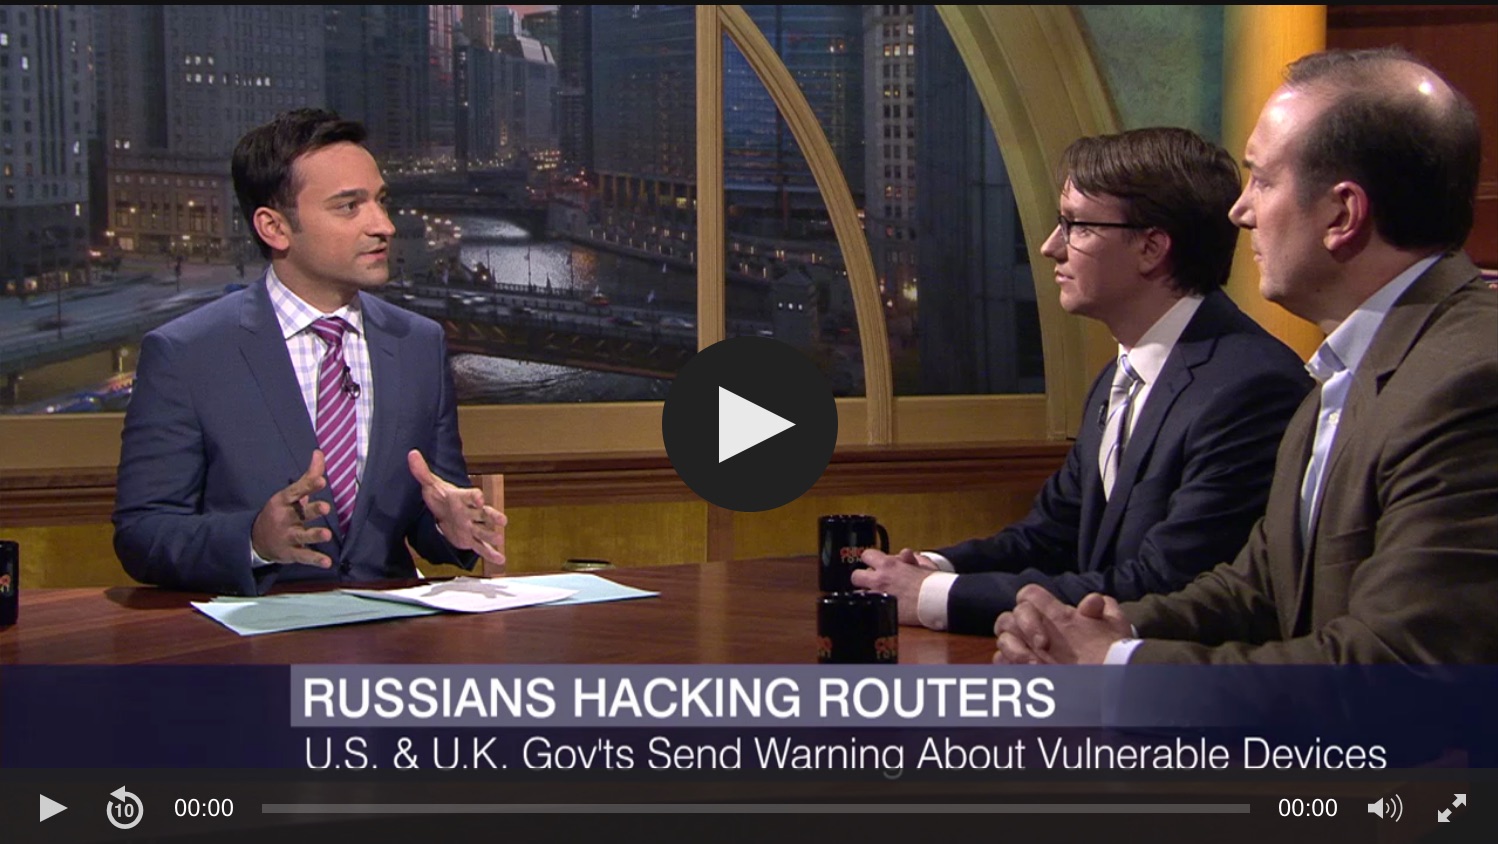 Russians Hacking Routers in the US and UK, Officials Warn